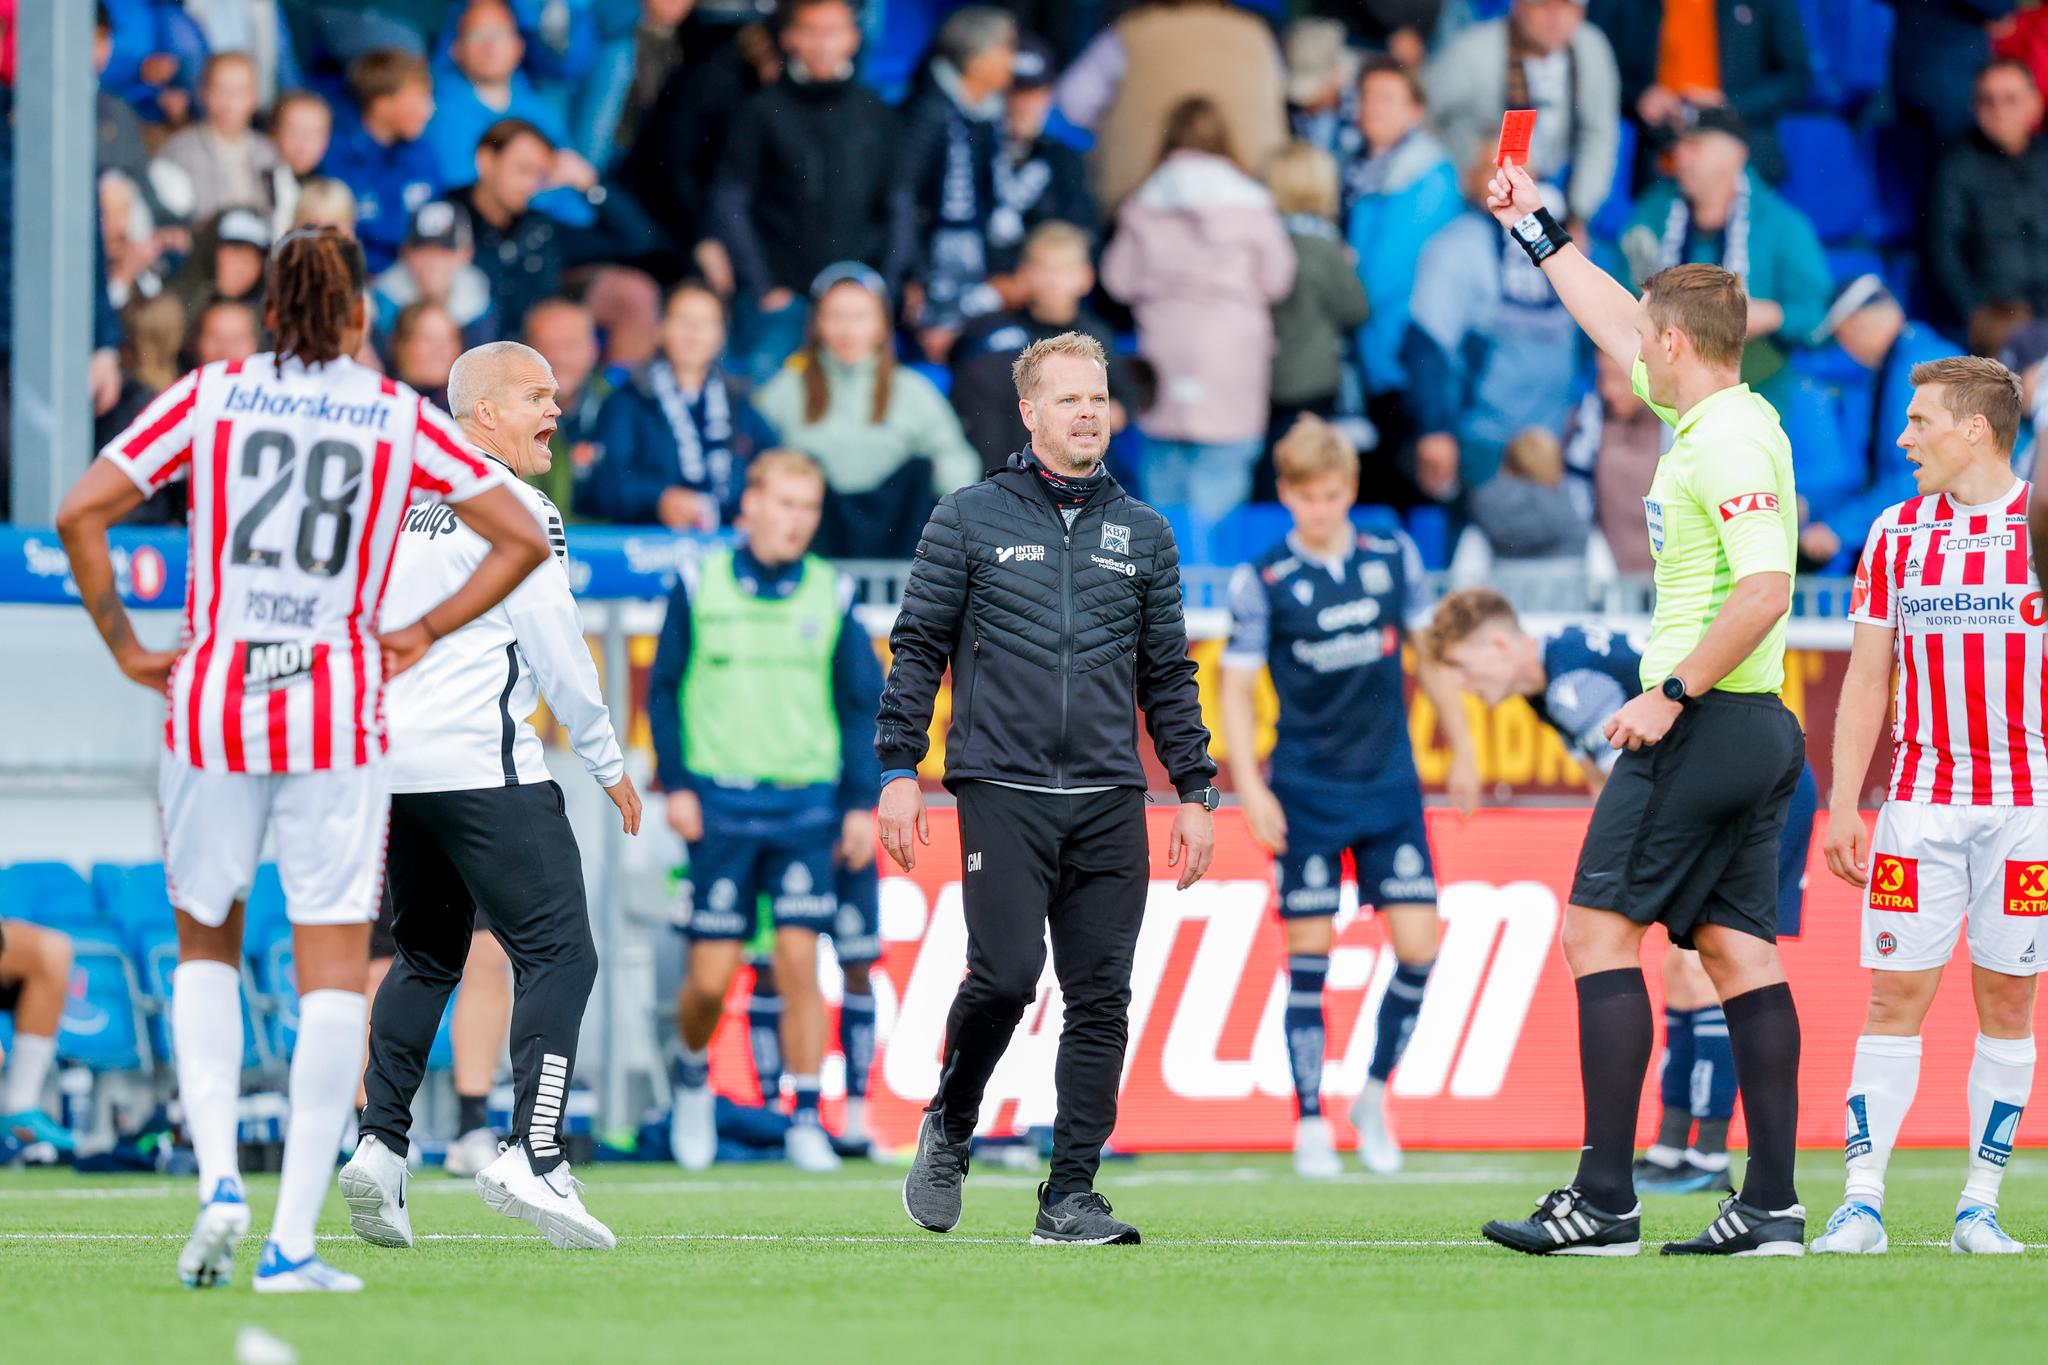 Kristiansund saves a point with a penalty in extra time